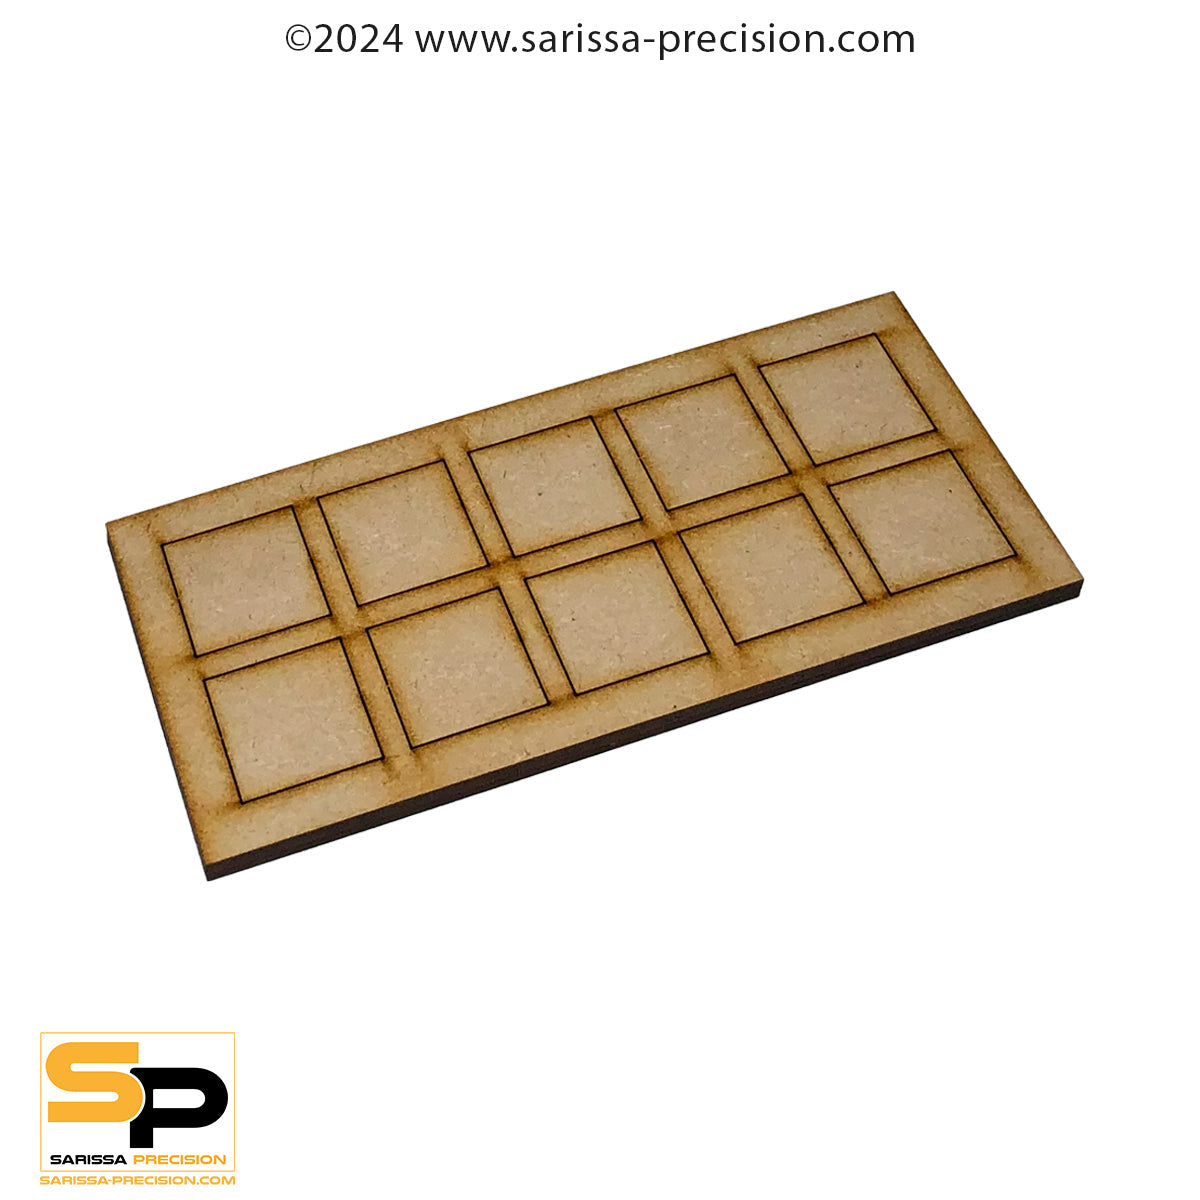 10 x 6 30x30mm Conversion Tray for 25x25mm bases